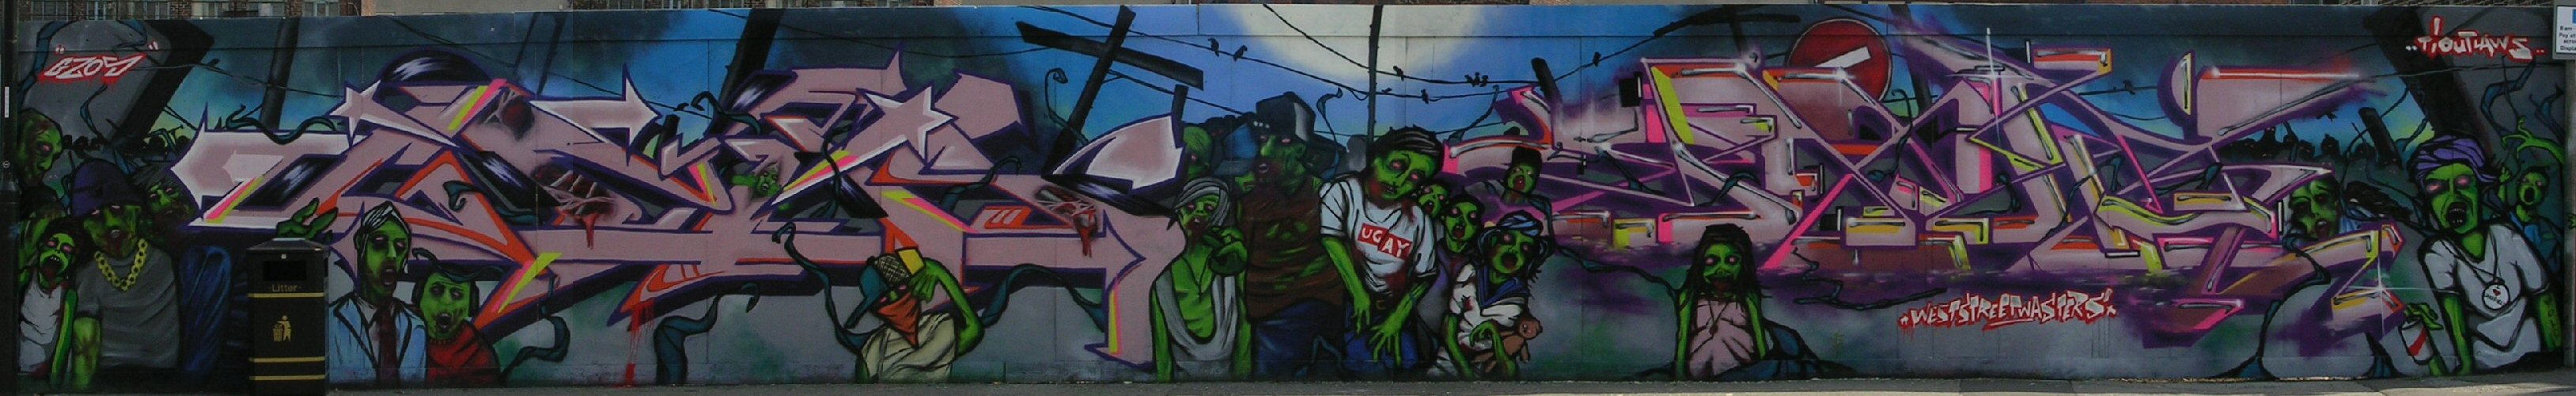 Zombies panorama by Gzos and Jaer - 18 June 2013